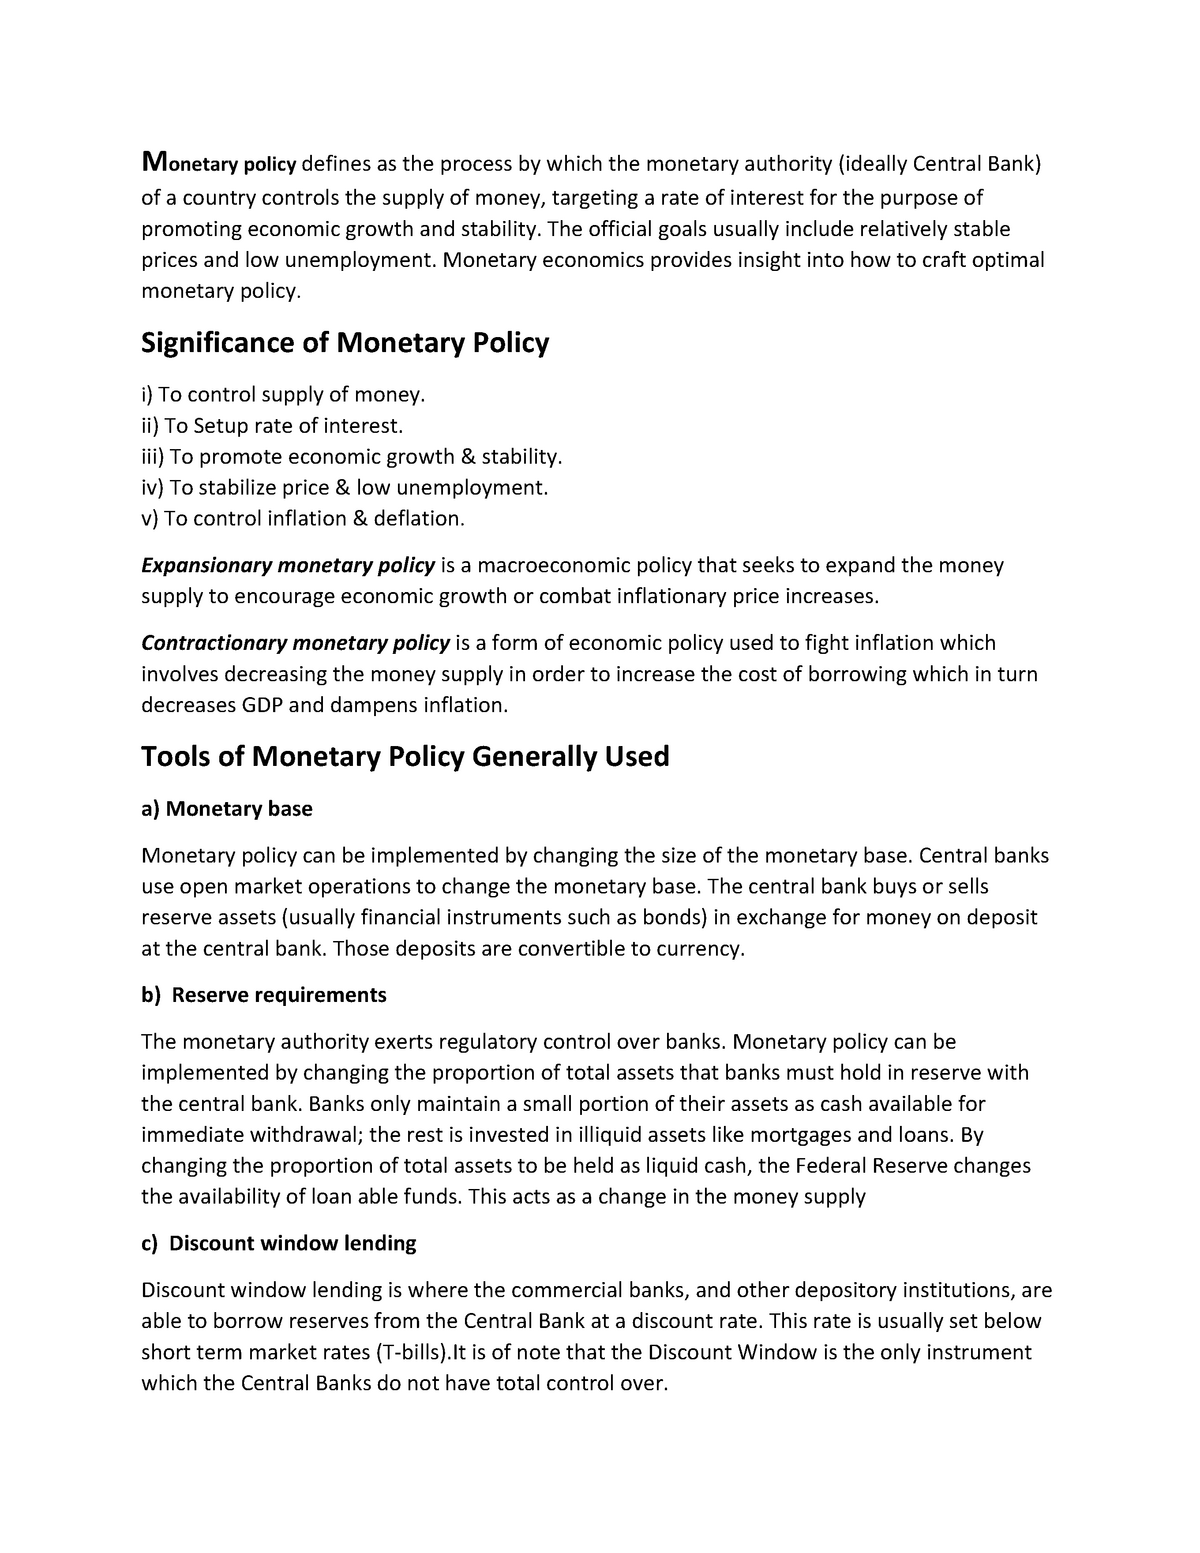 essay questions on monetary policy